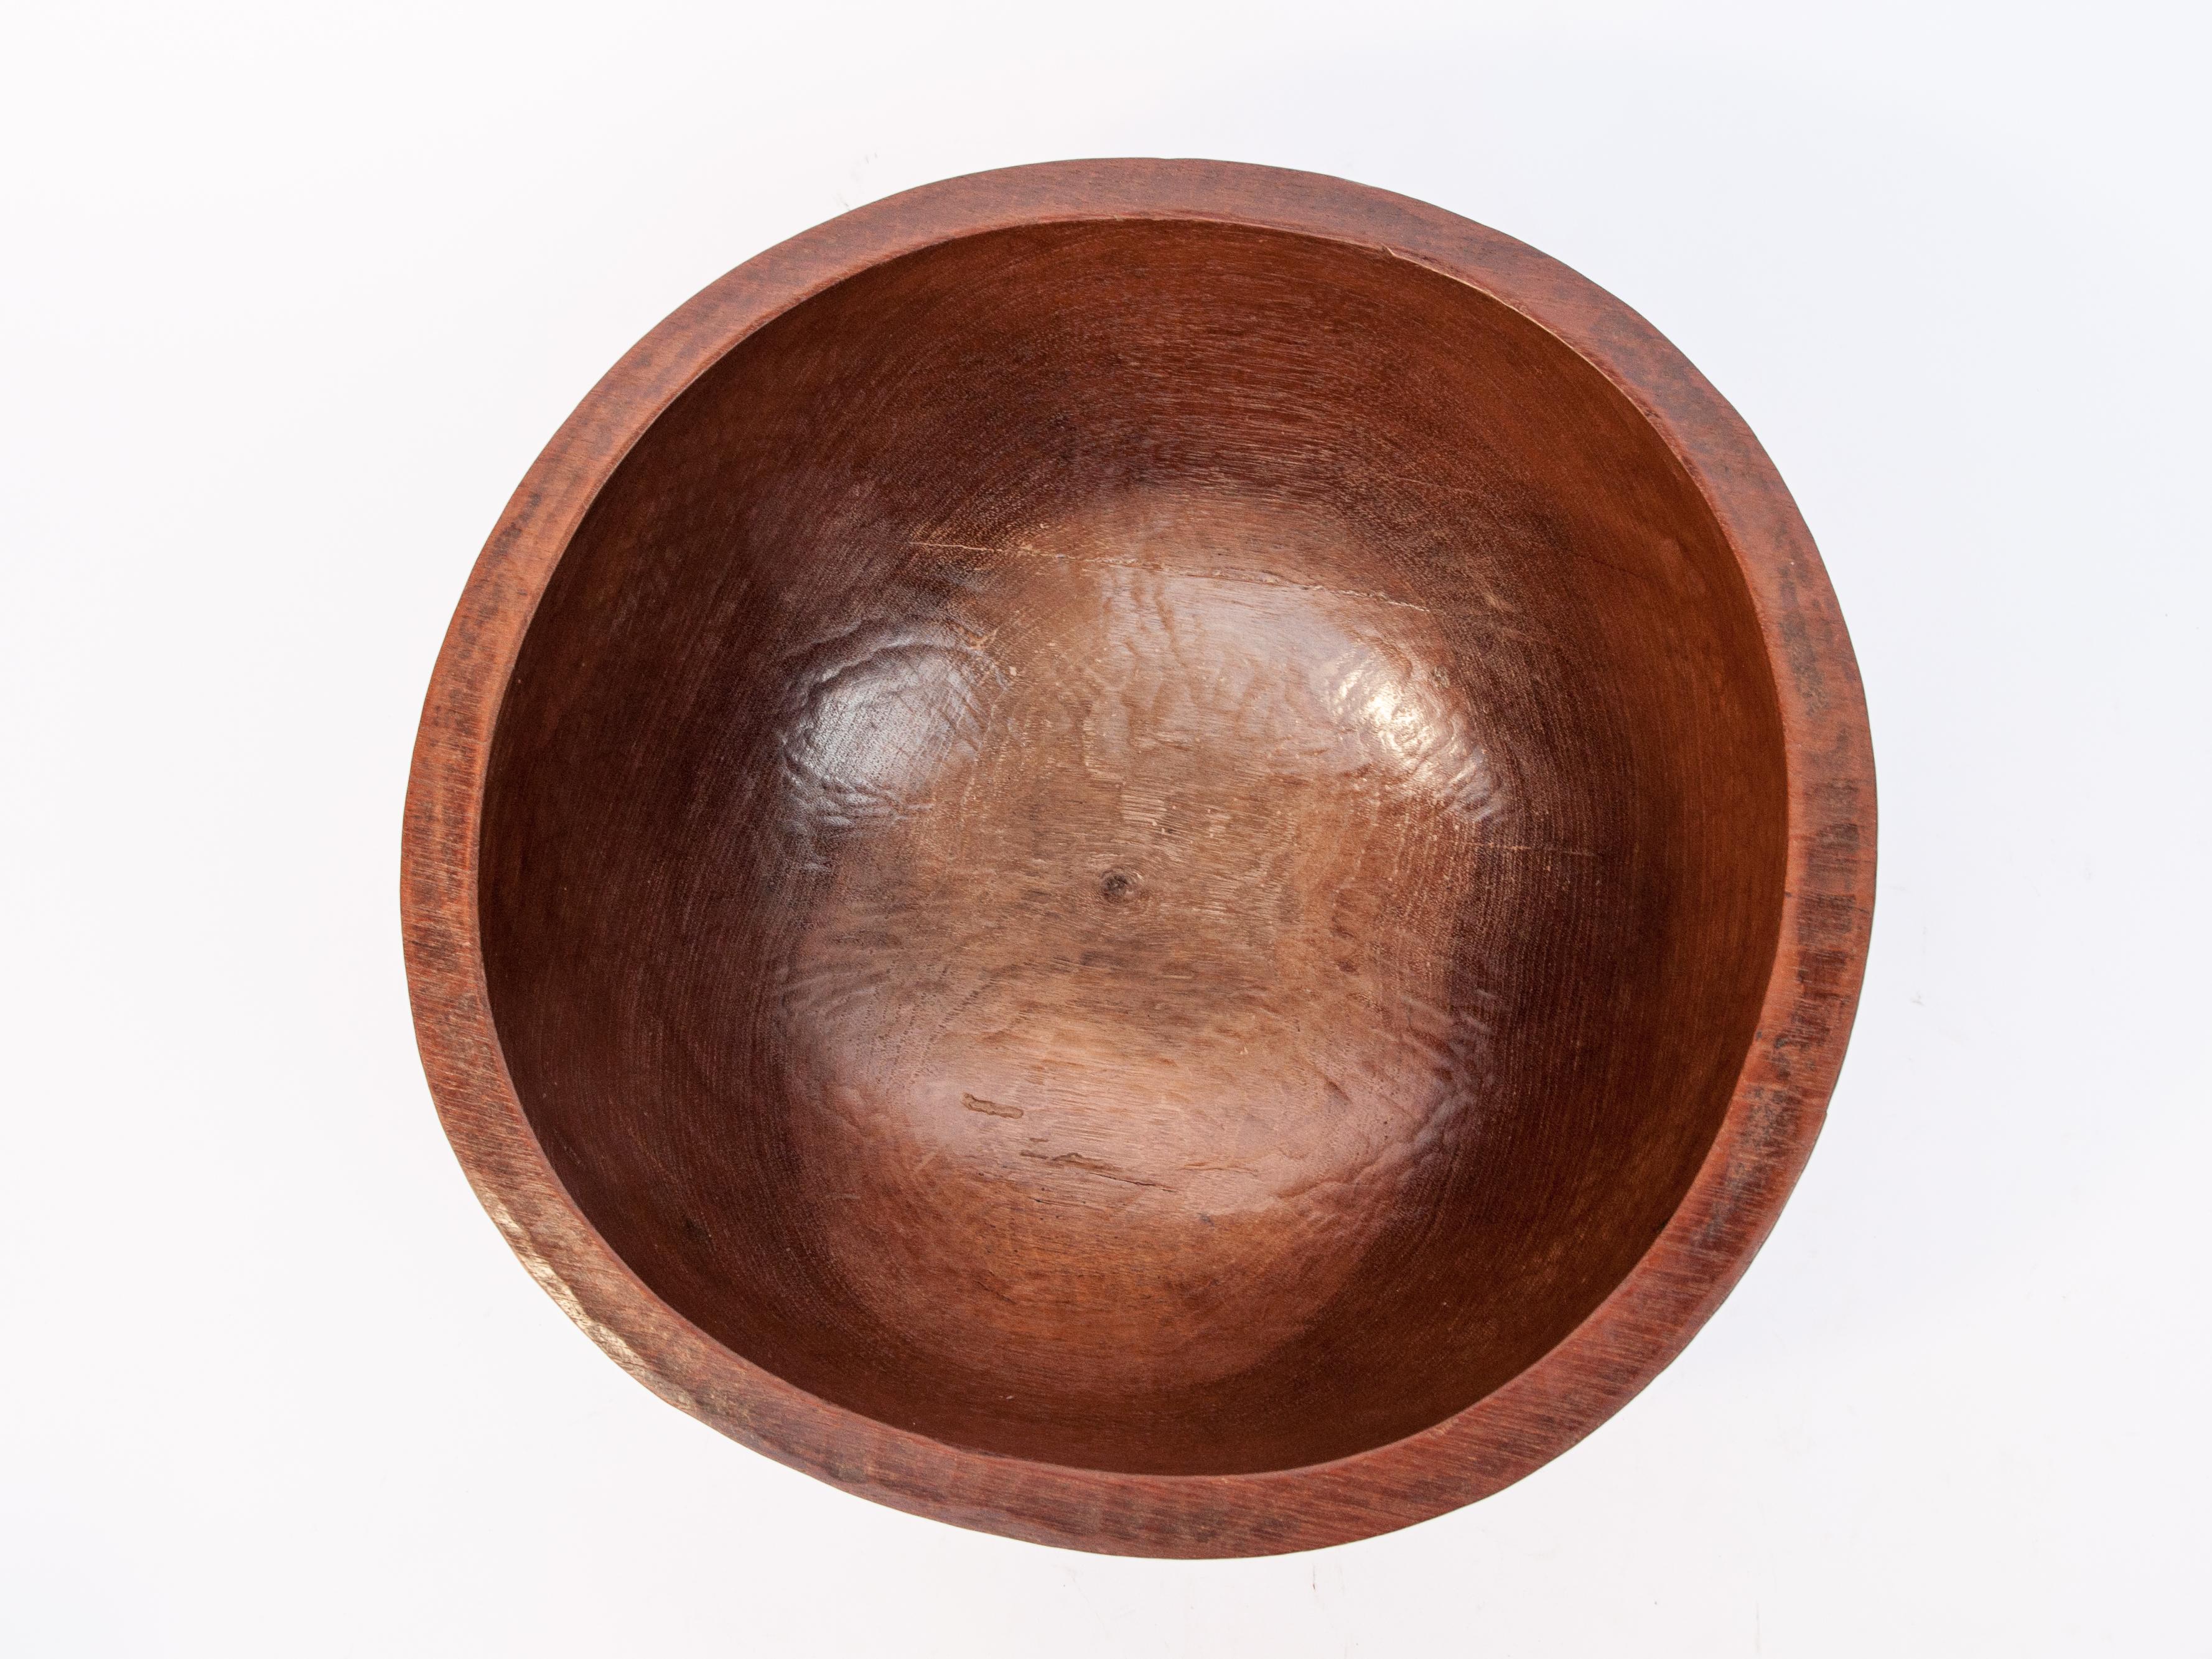 Nepalese Old Tribal Wooden Bowl from West Nepal Himal, Mid-20th Century